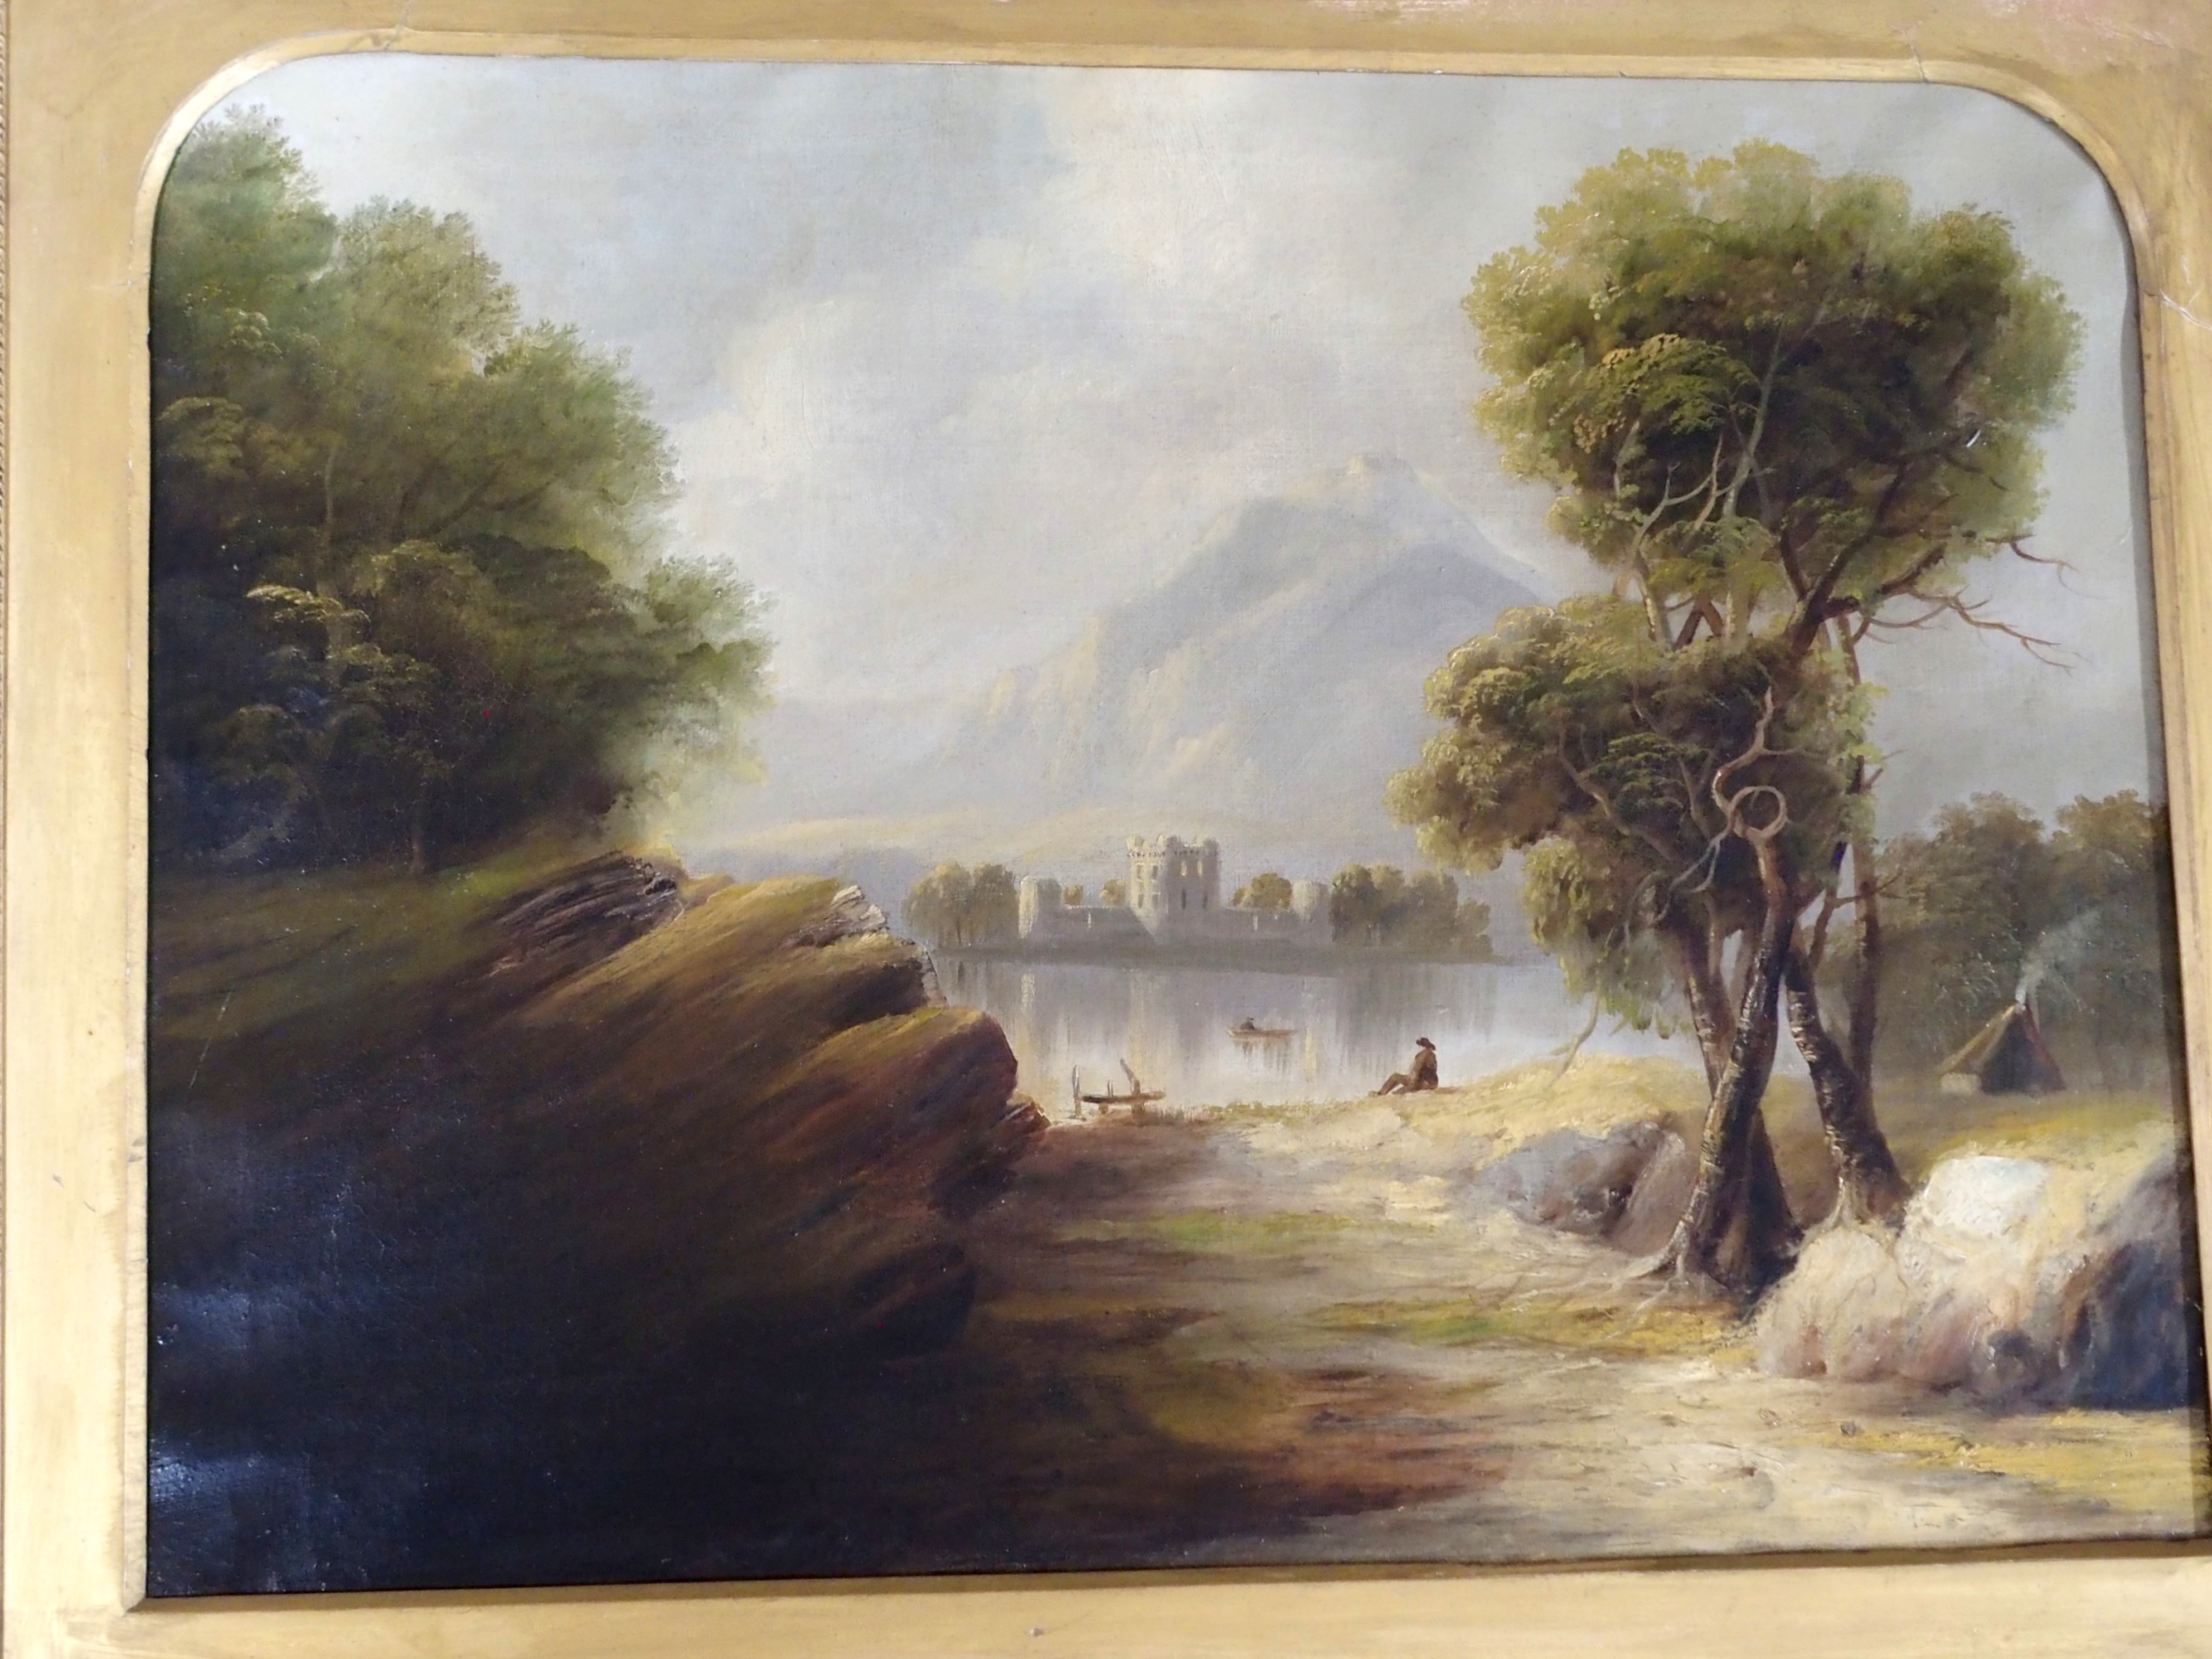 SCOTTISH SCHOOL (19TH CENTURY) BY THE BANKS OF A HIGHLAND LOCH Oil on canvas, 46 x 61cm (18 x - Image 3 of 4